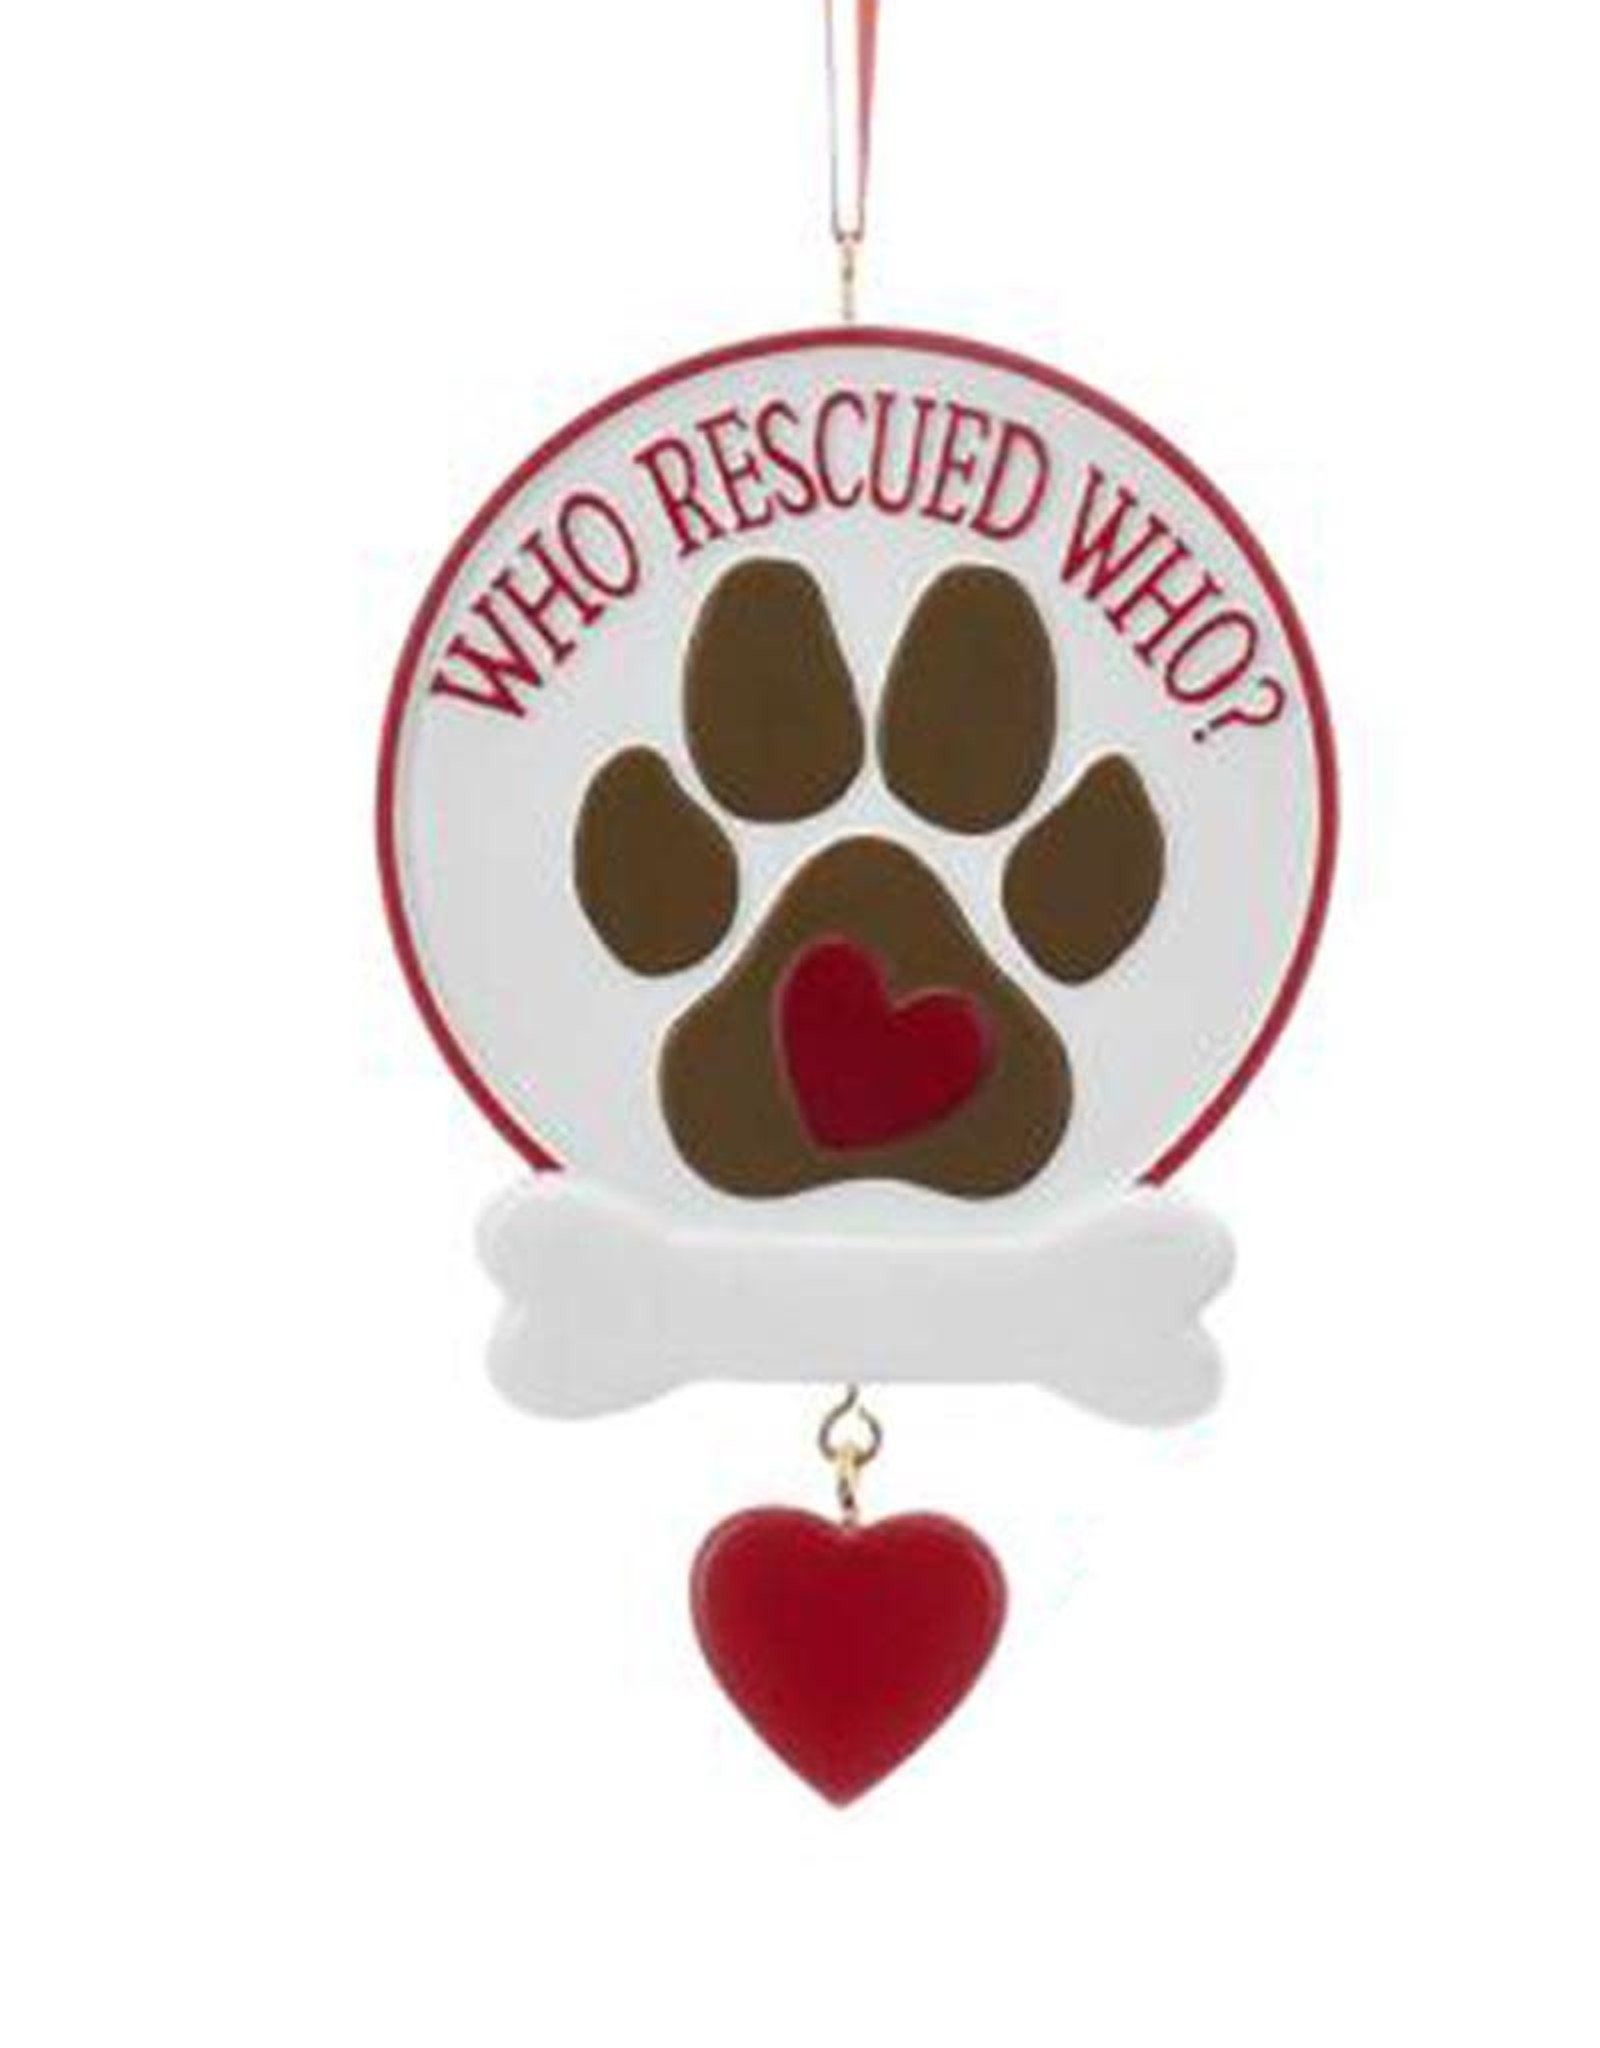 Kurt Adler Rescue Dog Ornament Who Rescued Who?